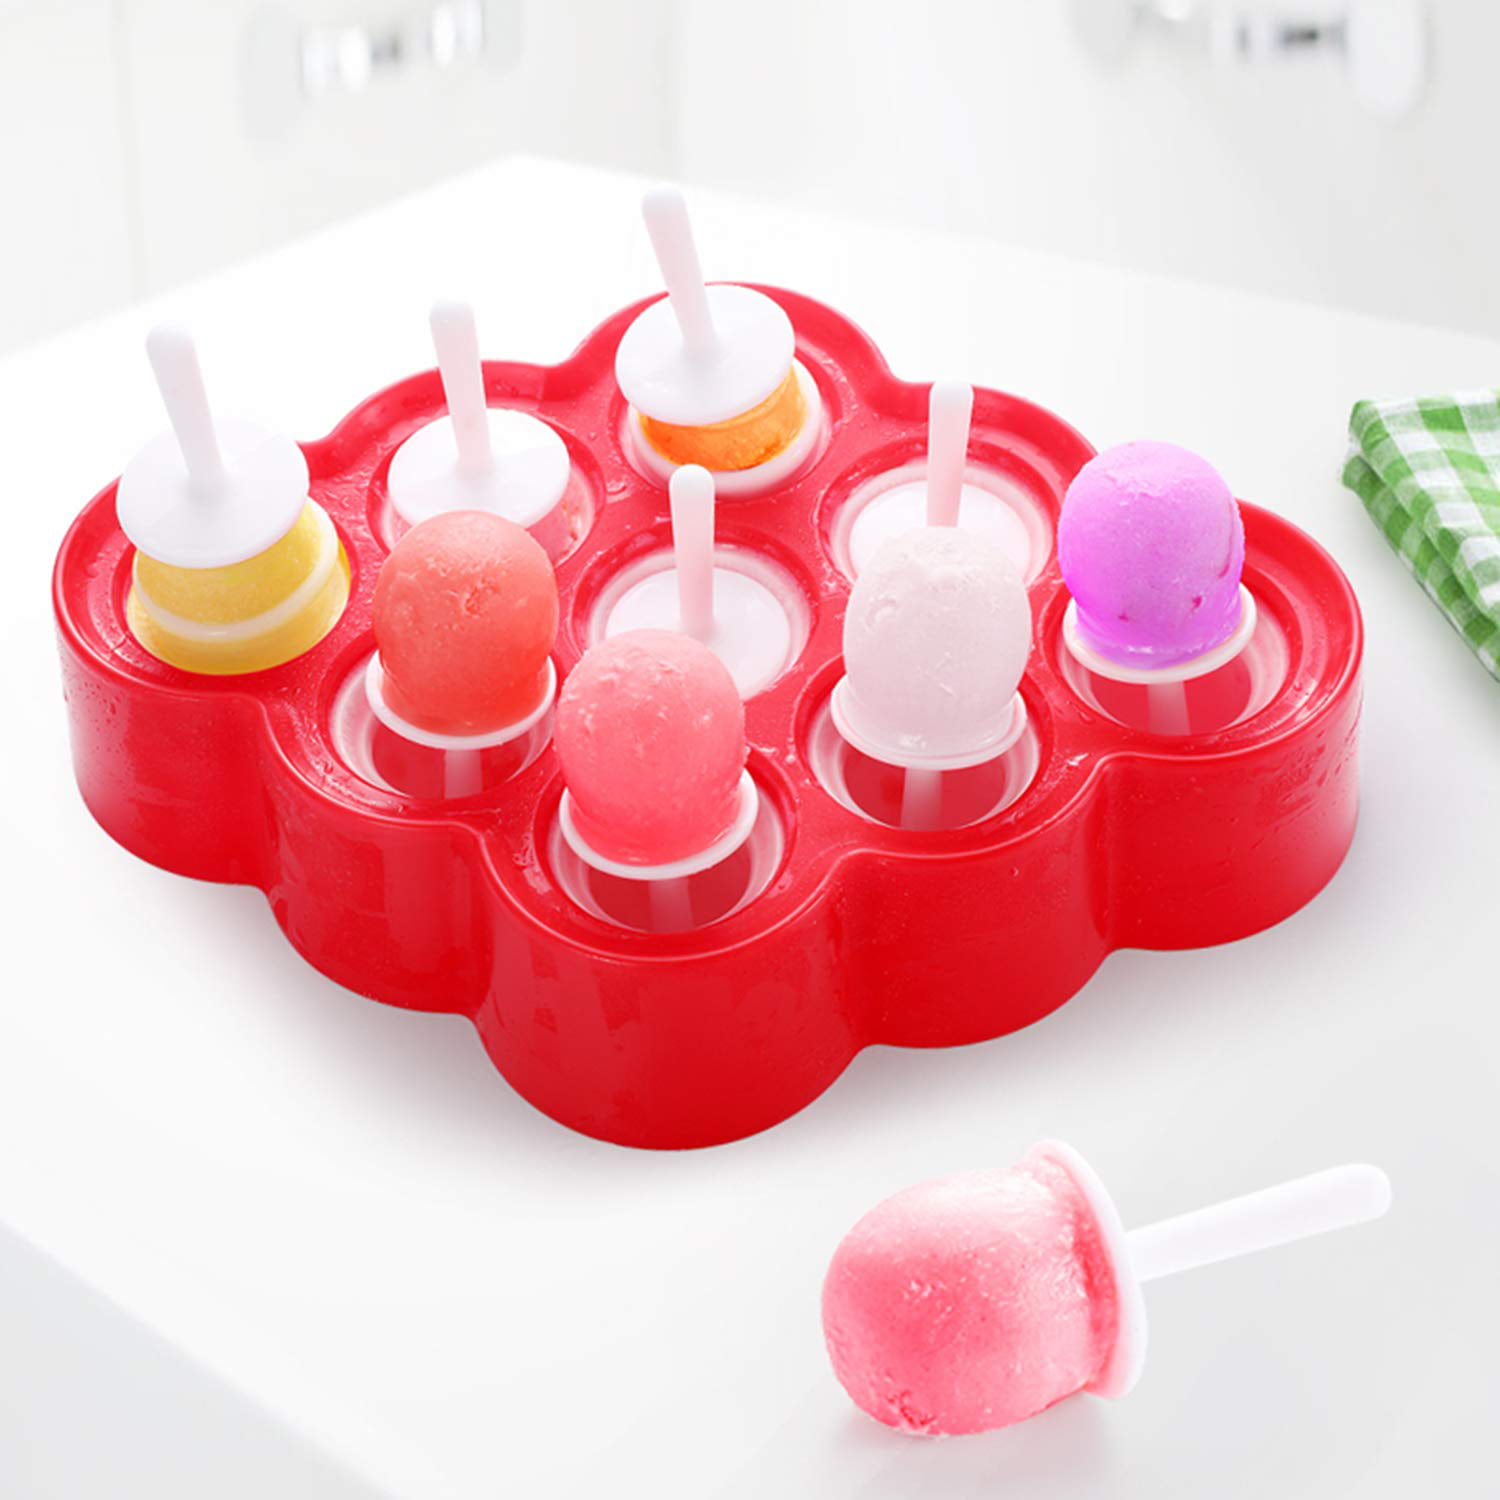 No Mess Large Popsicle Makers Molds and Ice Cream Freezer Popsicle Molds Popsicle Molds Dishwasher Safe and Easy Release Popsicle Molds for Kids Silicone BPA Free with 2 Extra Reusable Sticks 